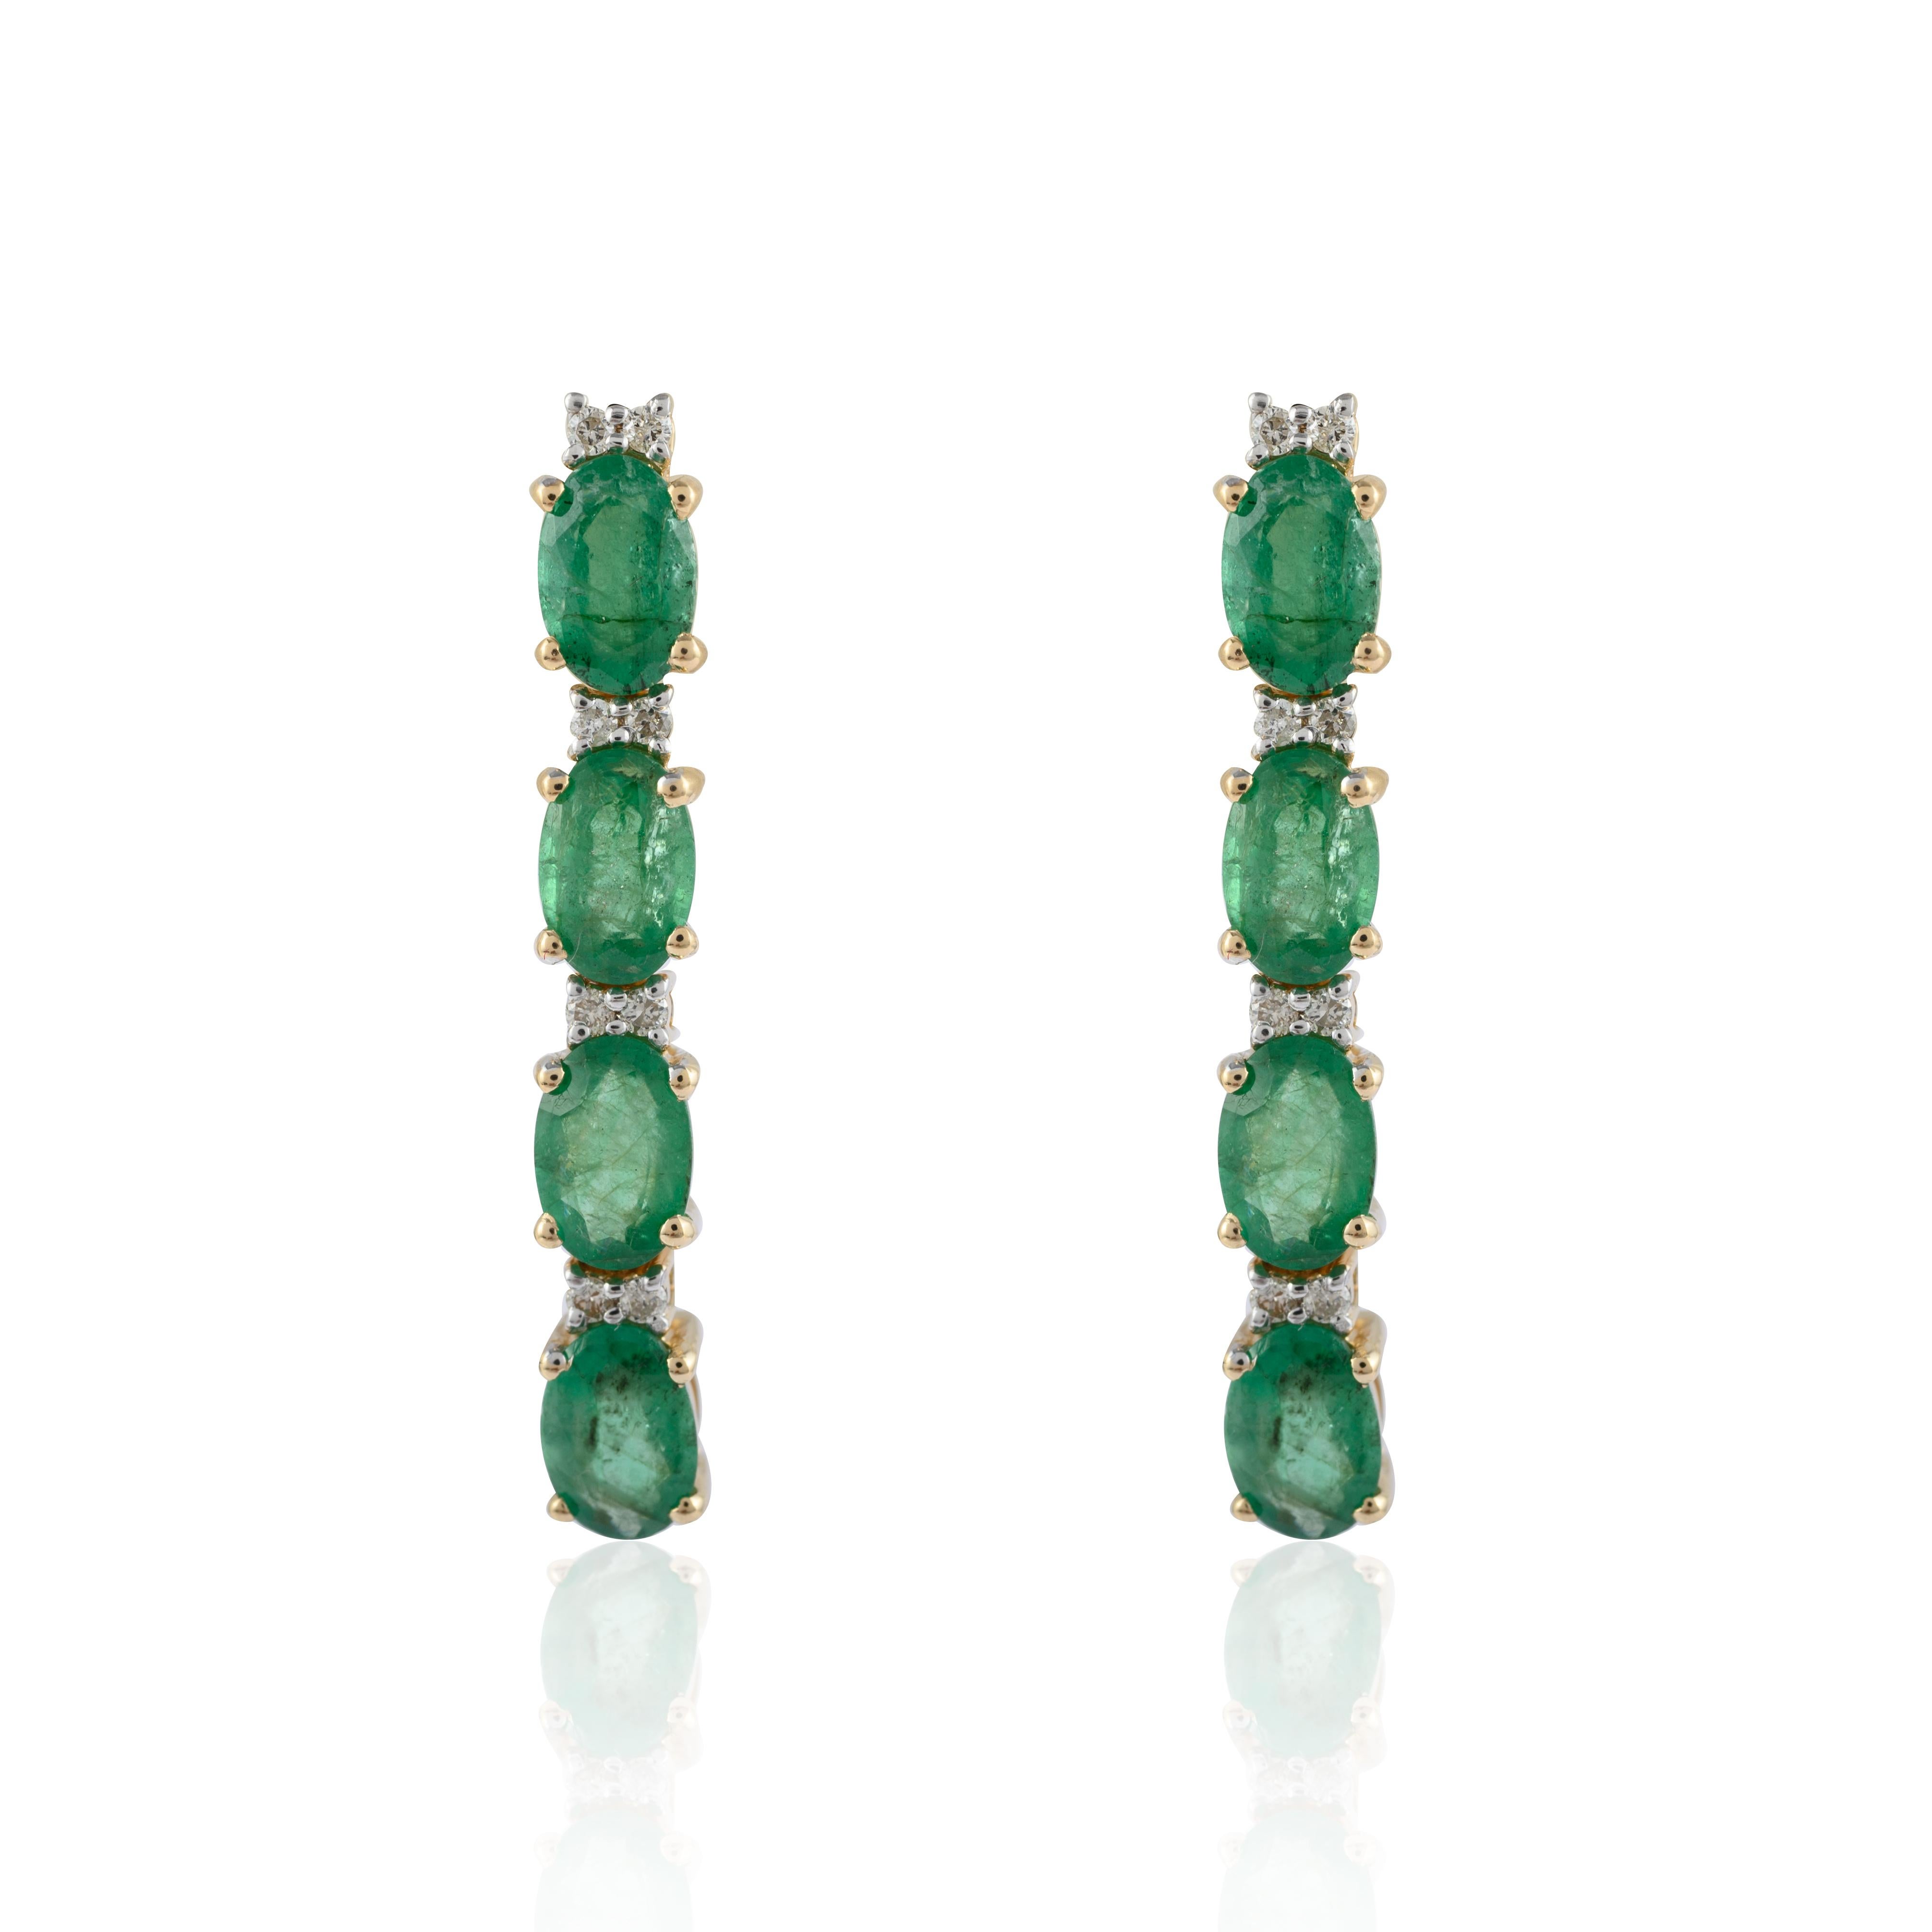 Emerald Long Hanging Earrings in 14K Gold to make a statement with your look. These earrings create a sparkling, luxurious look featuring oval cut gemstone.
Emerald enhances the intellectual capacity. 
Designed with alternate oval emerald and